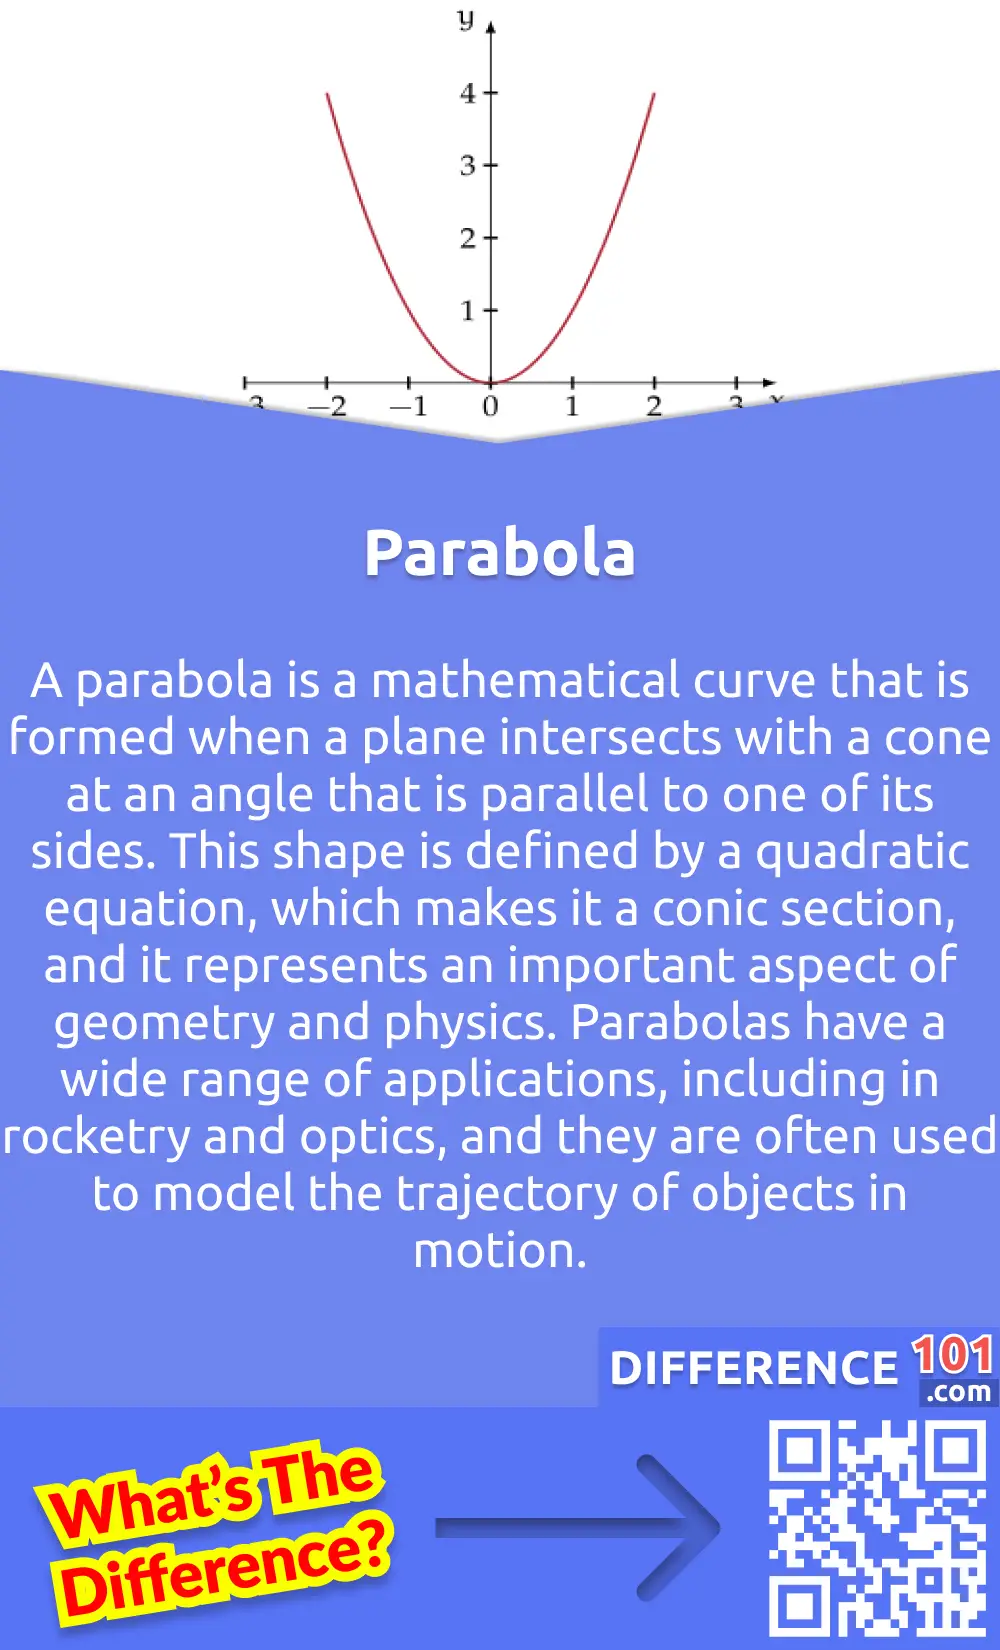 What Is Parabola? A parabola is a mathematical curve that is formed when a plane intersects with a cone at an angle that is parallel to one of its sides. This shape is defined by a quadratic equation, which makes it a conic section, and it represents an important aspect of geometry and physics. Parabolas have a wide range of applications, including in rocketry and optics, and they are often used to model the trajectory of objects in motion. Beams of light and sound waves can also be focused using parabolic reflectors, which makes this curve a crucial element in modern technology. Overall, understanding the properties of the parabola is essential for anyone interested in the fields of mathematics, engineering, or physics.